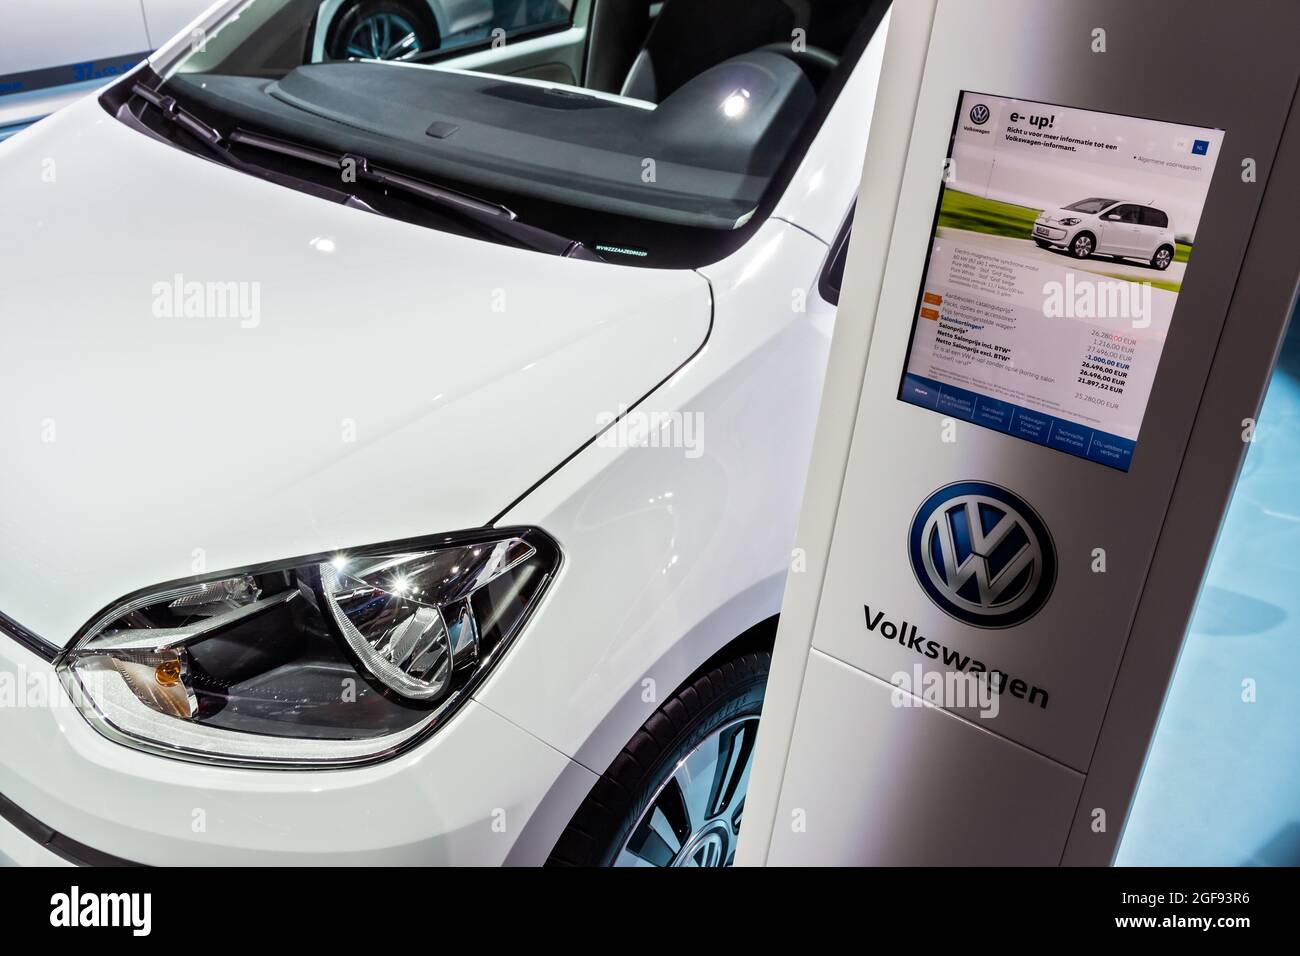 Volkswagen e-up electric car information at the Brussels Expo Autosalon motor show. Belgium - January 12, 2016 Stock Photo